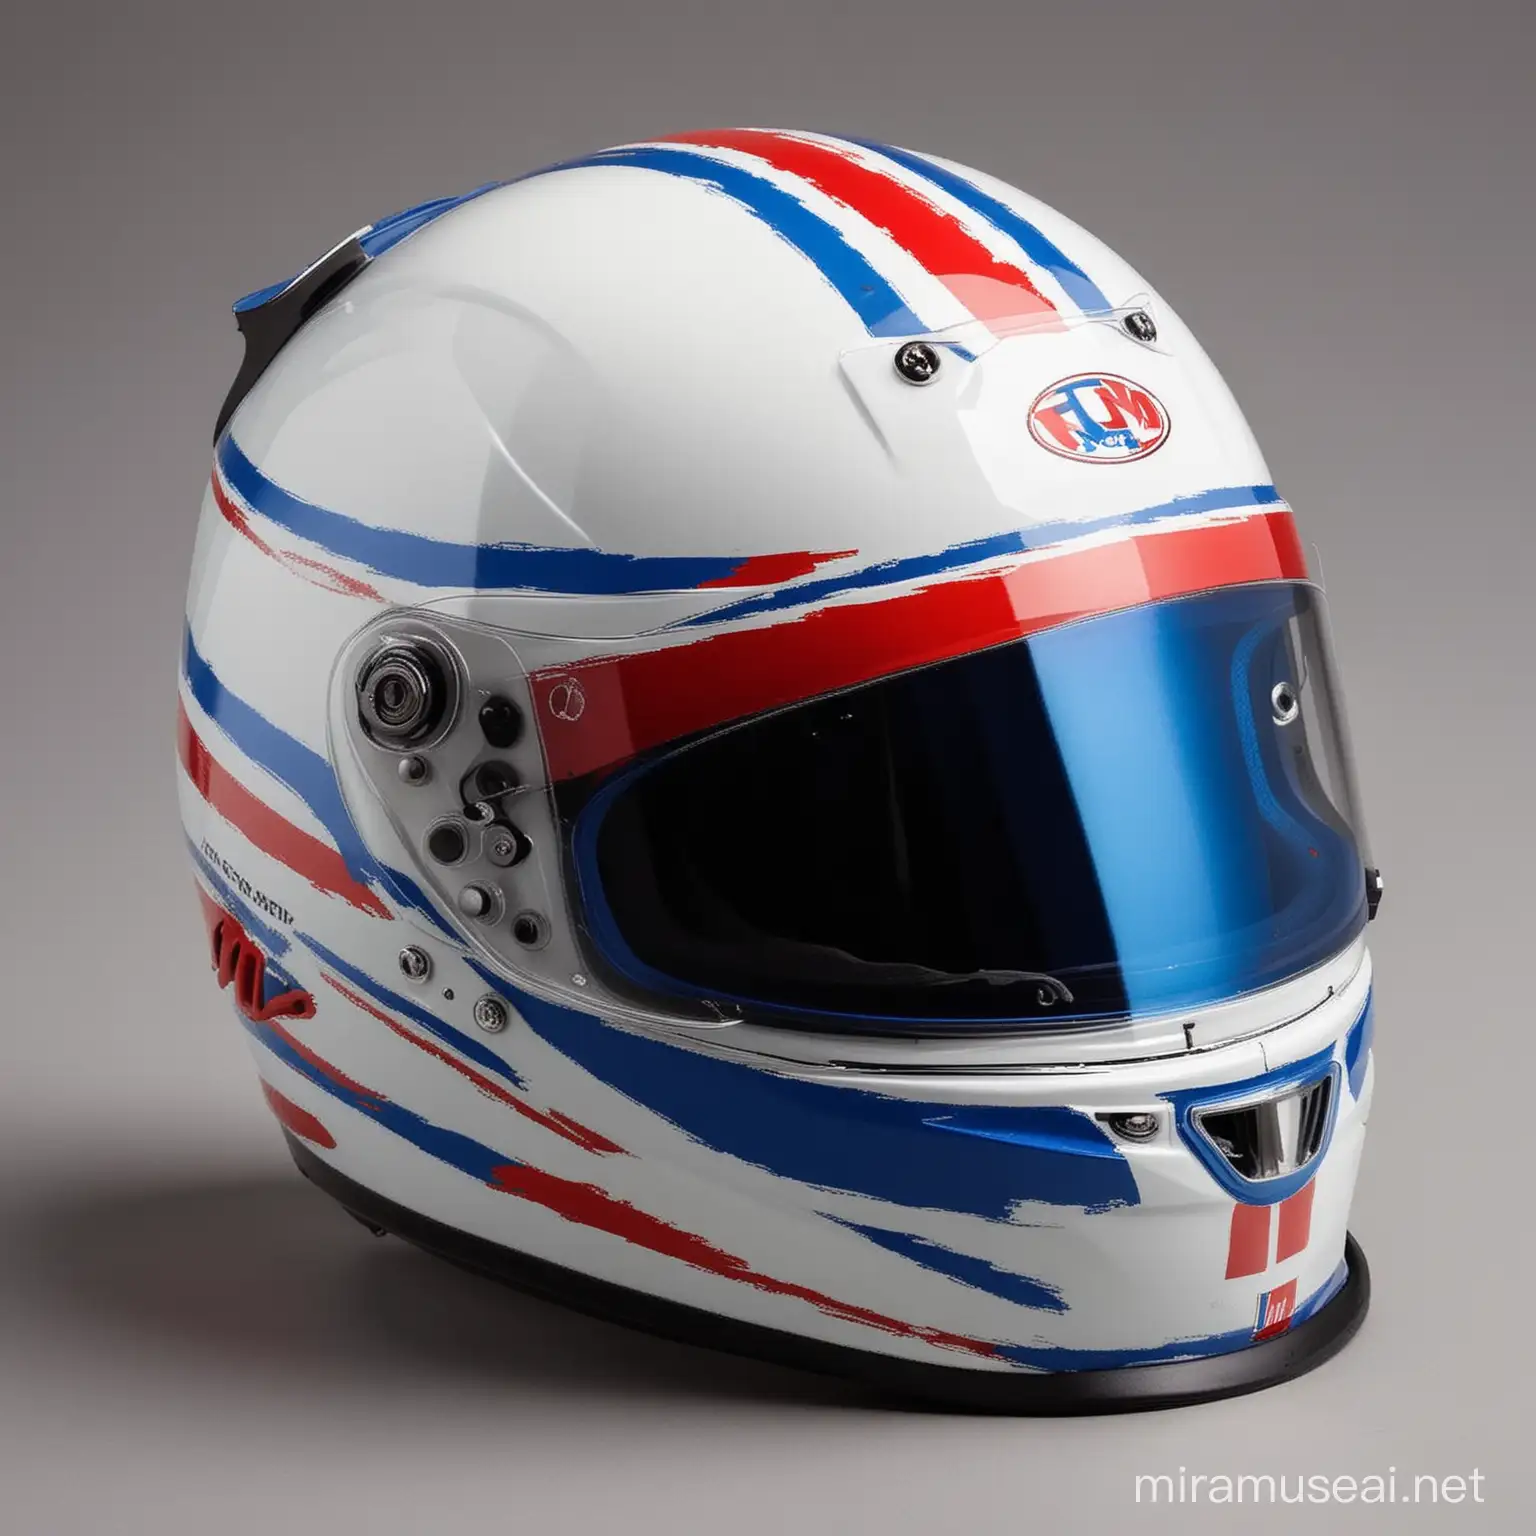 White and Blue Racing Helmet with Red Lines